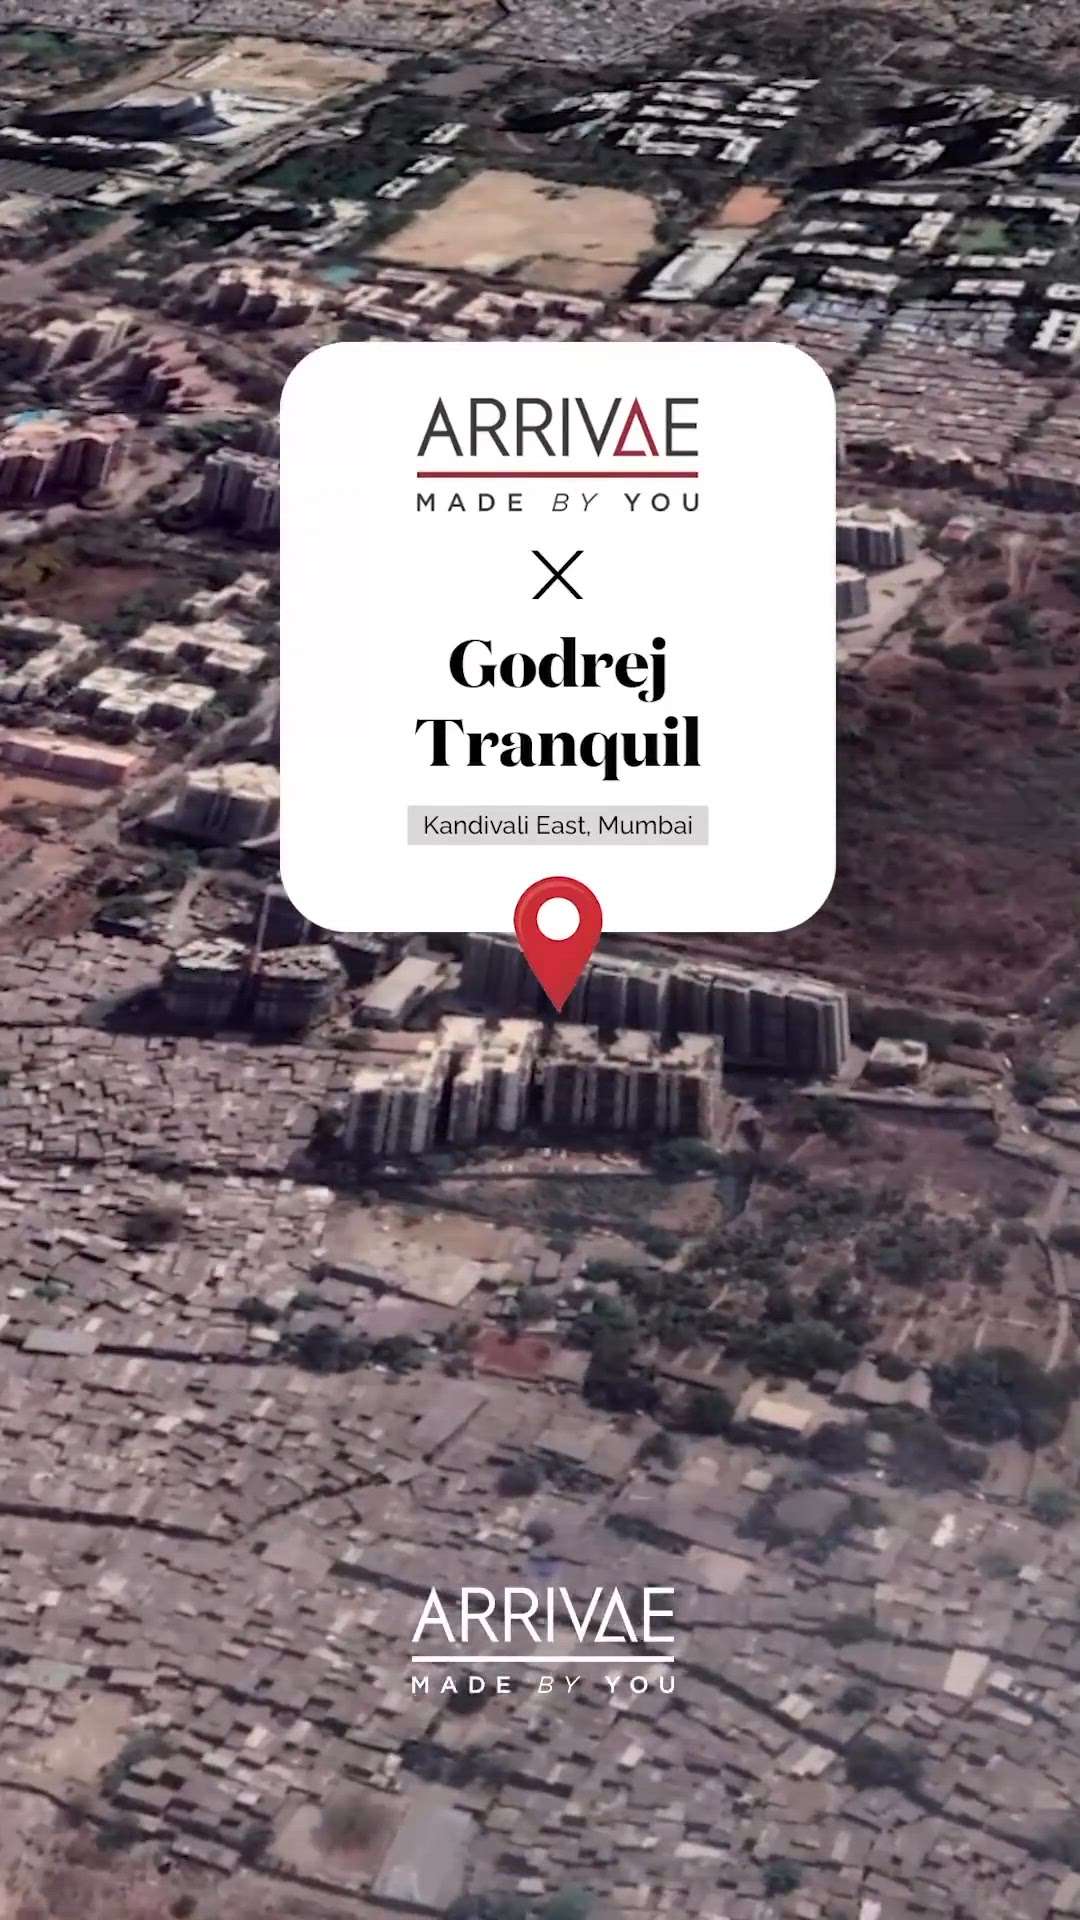 #ArrivaeLiving: This chic, contemporary 2BHK home in #GodrejTranquil in the verdant area of #Kandivali, #Mumbai, was designed with our expertly curated range Colours Of The Season. Discover Arrivae designed homes in your society and start your dream home journey with us today!

#mumbaihomes #mumbaihome #mumbaihomedecor #indiabulls #skyforest #luxuryhomes #luxurylifestyle #luxuryliving #luxelife #luxeliving #hojayega #luxuryapartments #apartmentdesign #apartmentdecor